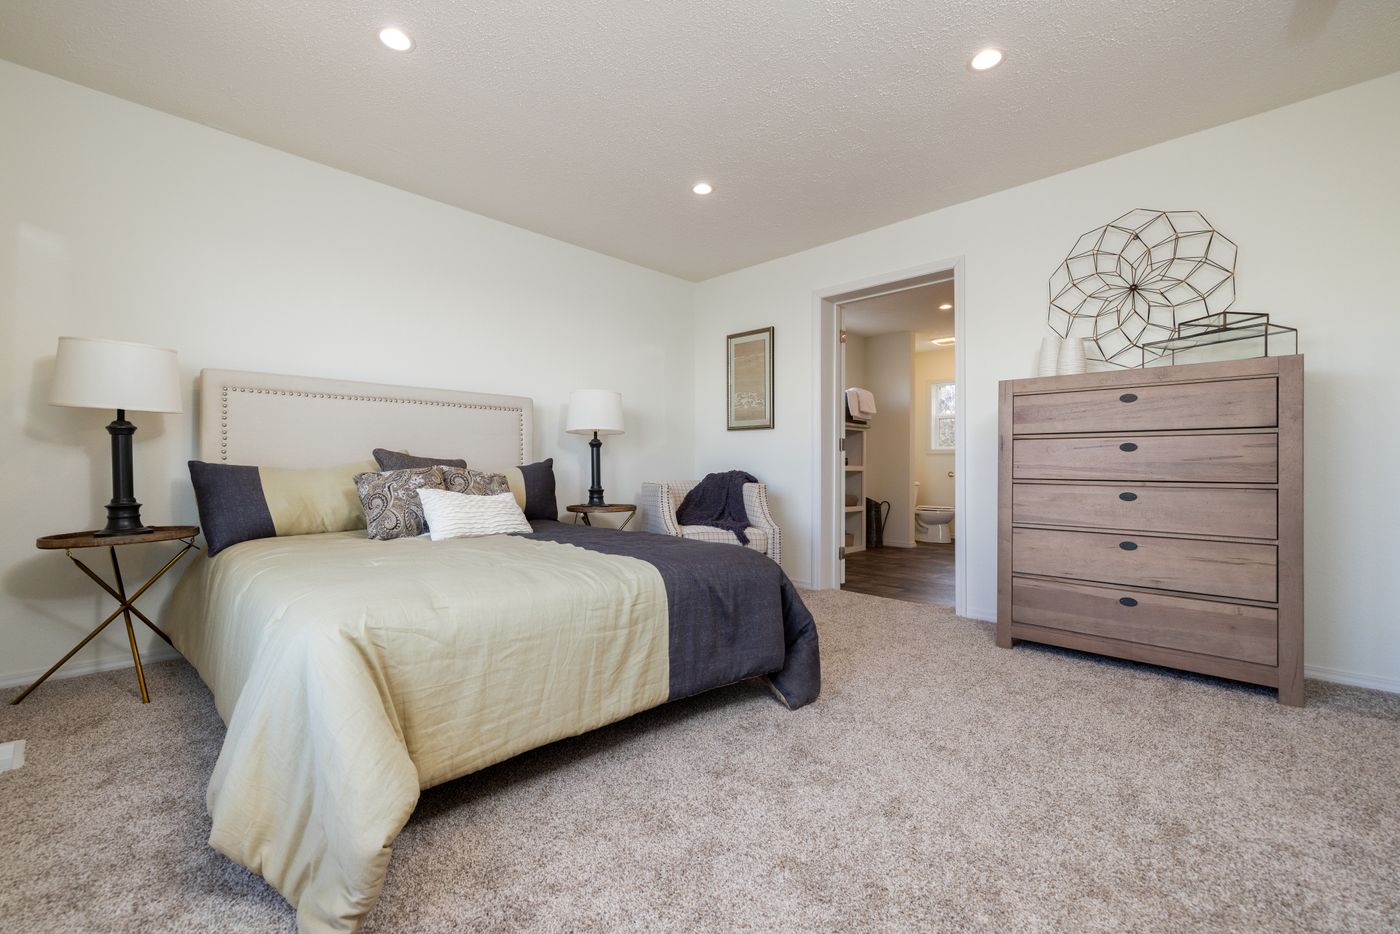 The THE WASHINGTON MOD Bedroom. This Modular Home features 3 bedrooms and 2 baths.